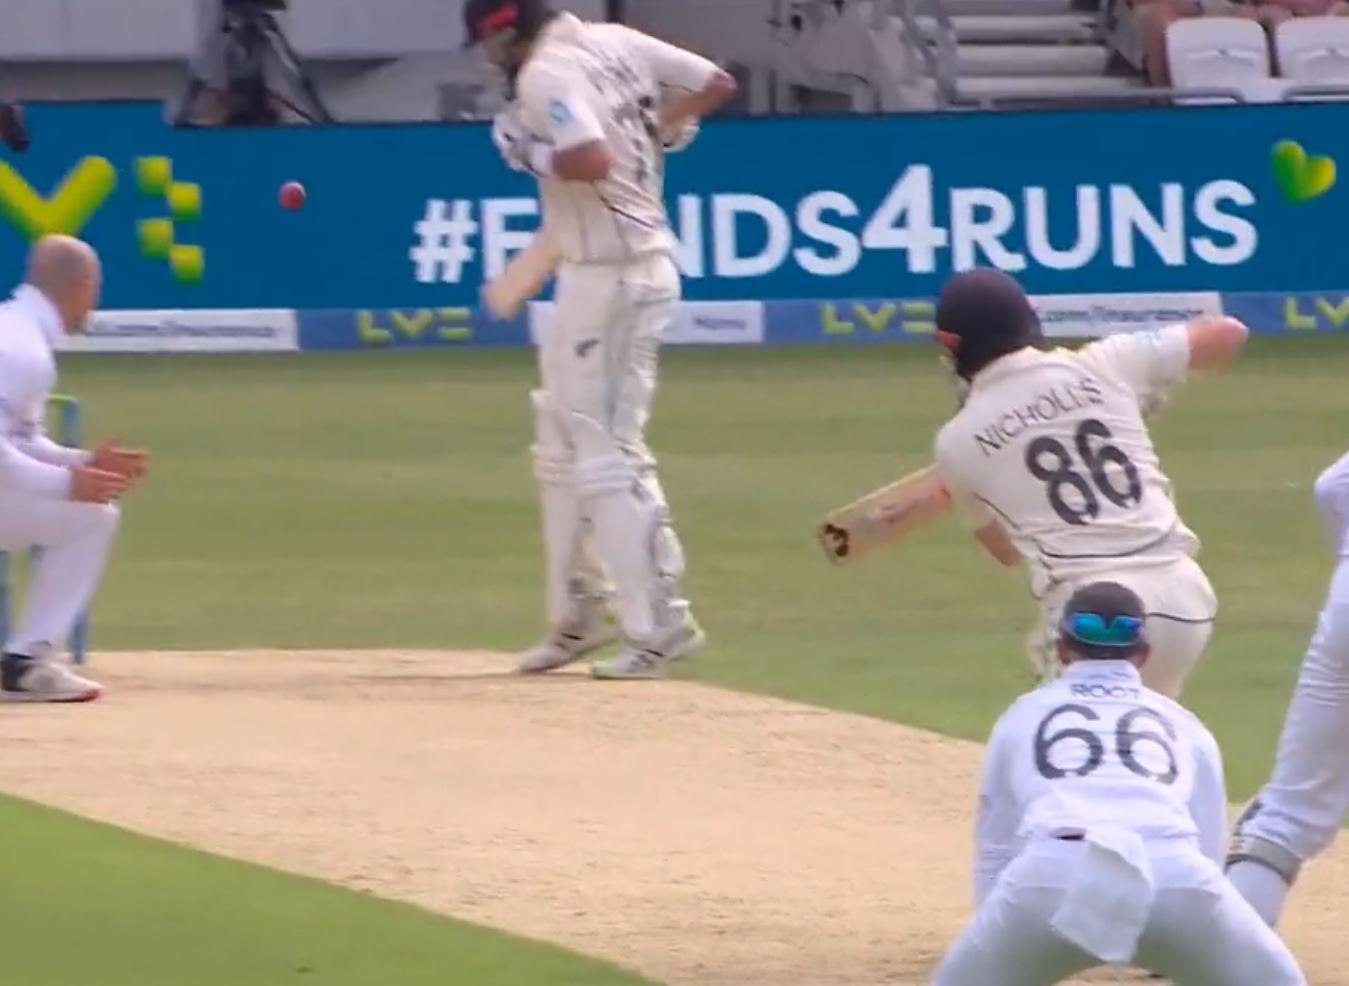 Nicholls' shot hit Mitchell's bat at bowling end and ball went to mid off fielder | Twitter